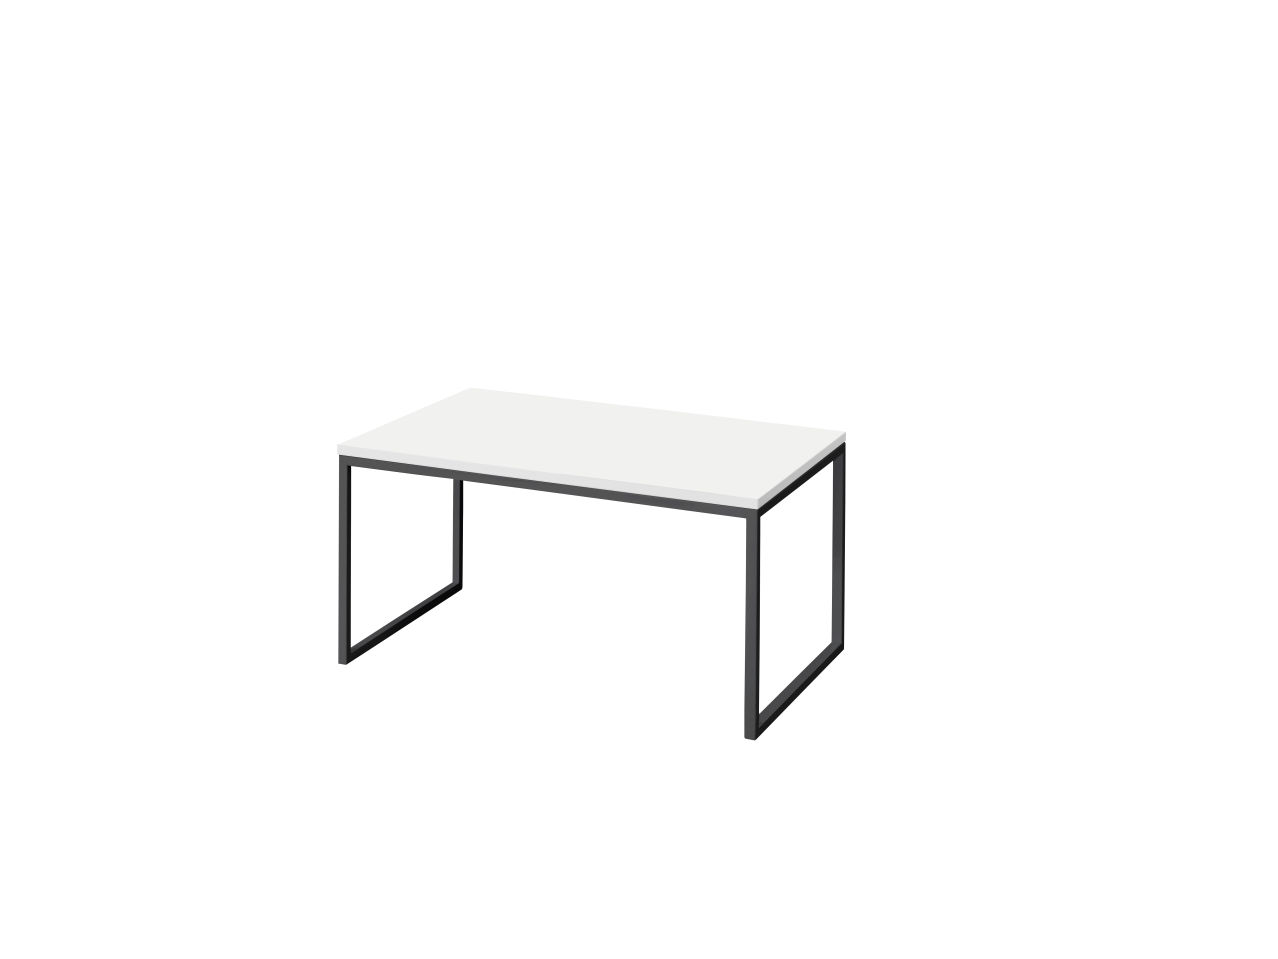 now! by hülsta. coffee tables | Couchtisch CT 17-1 | H: 33,8 cm | B: 70,6 cm | T: 41,7 cm